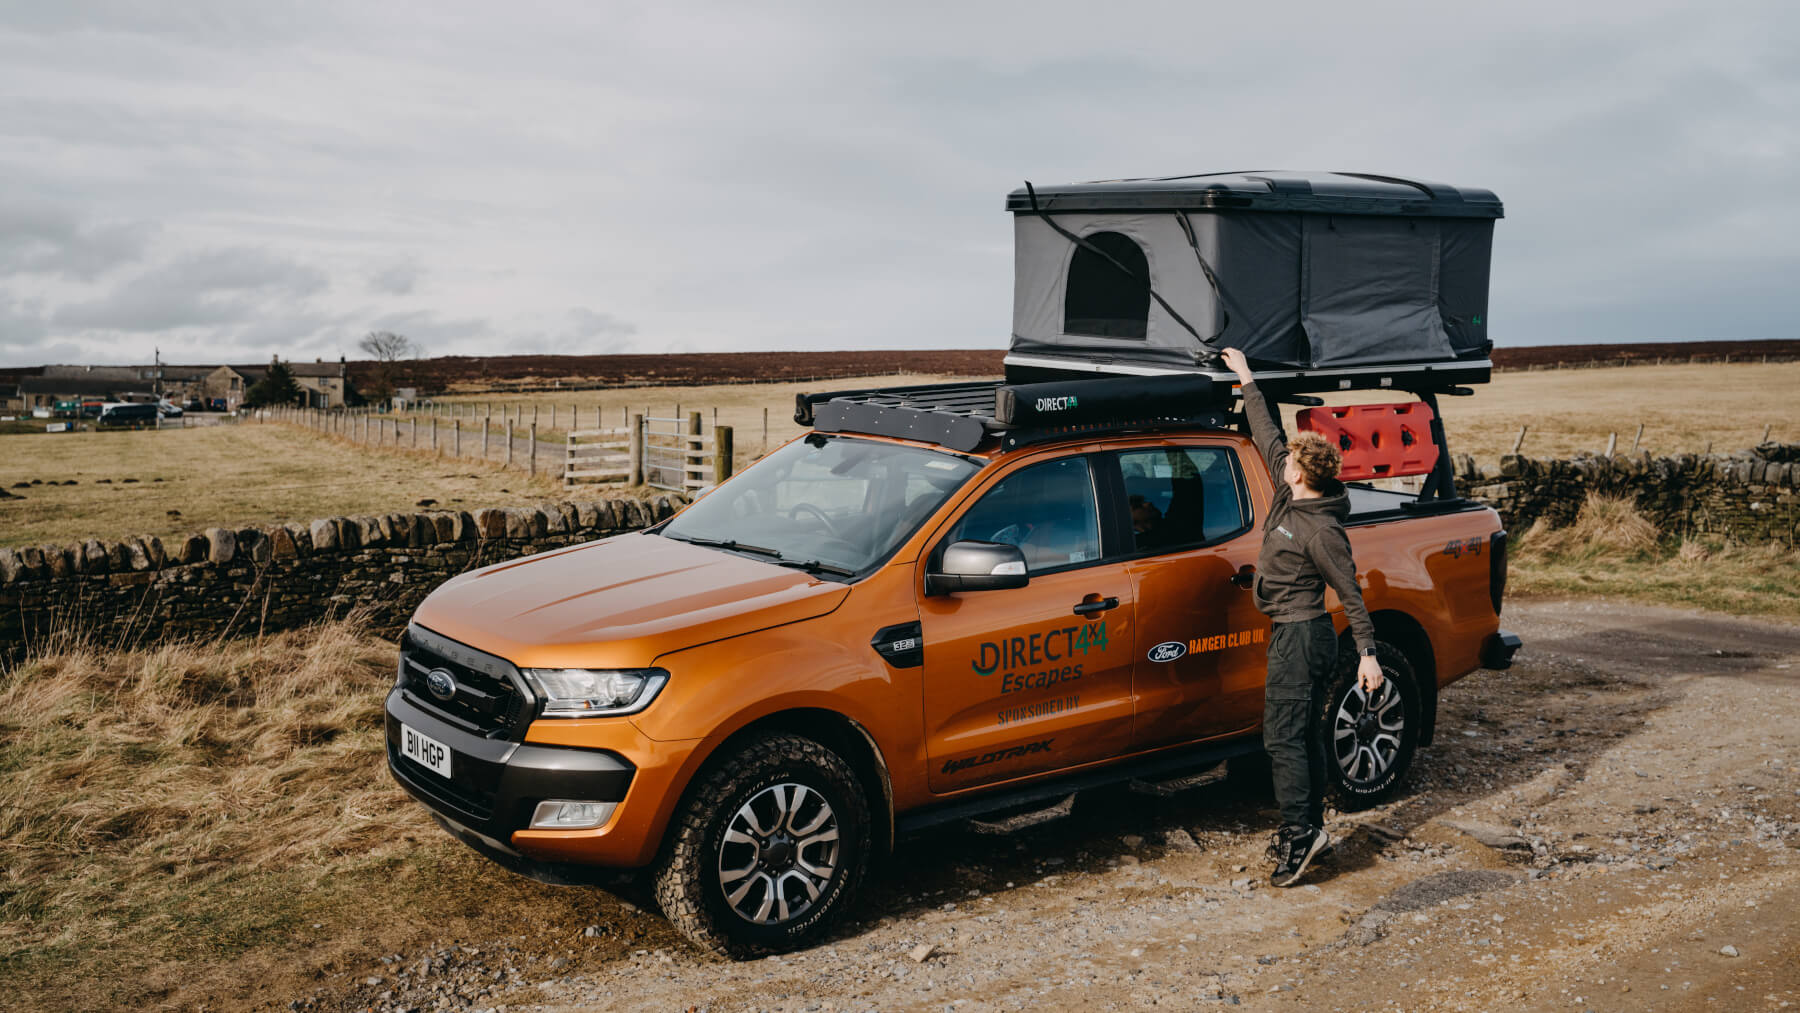 Photo of an orange Ford Ranger Wildtrak pickup truck in a countryside farmer's field equipped with Direct4x4 overland expedition gear including roof tack, rooftop camping tent and more.